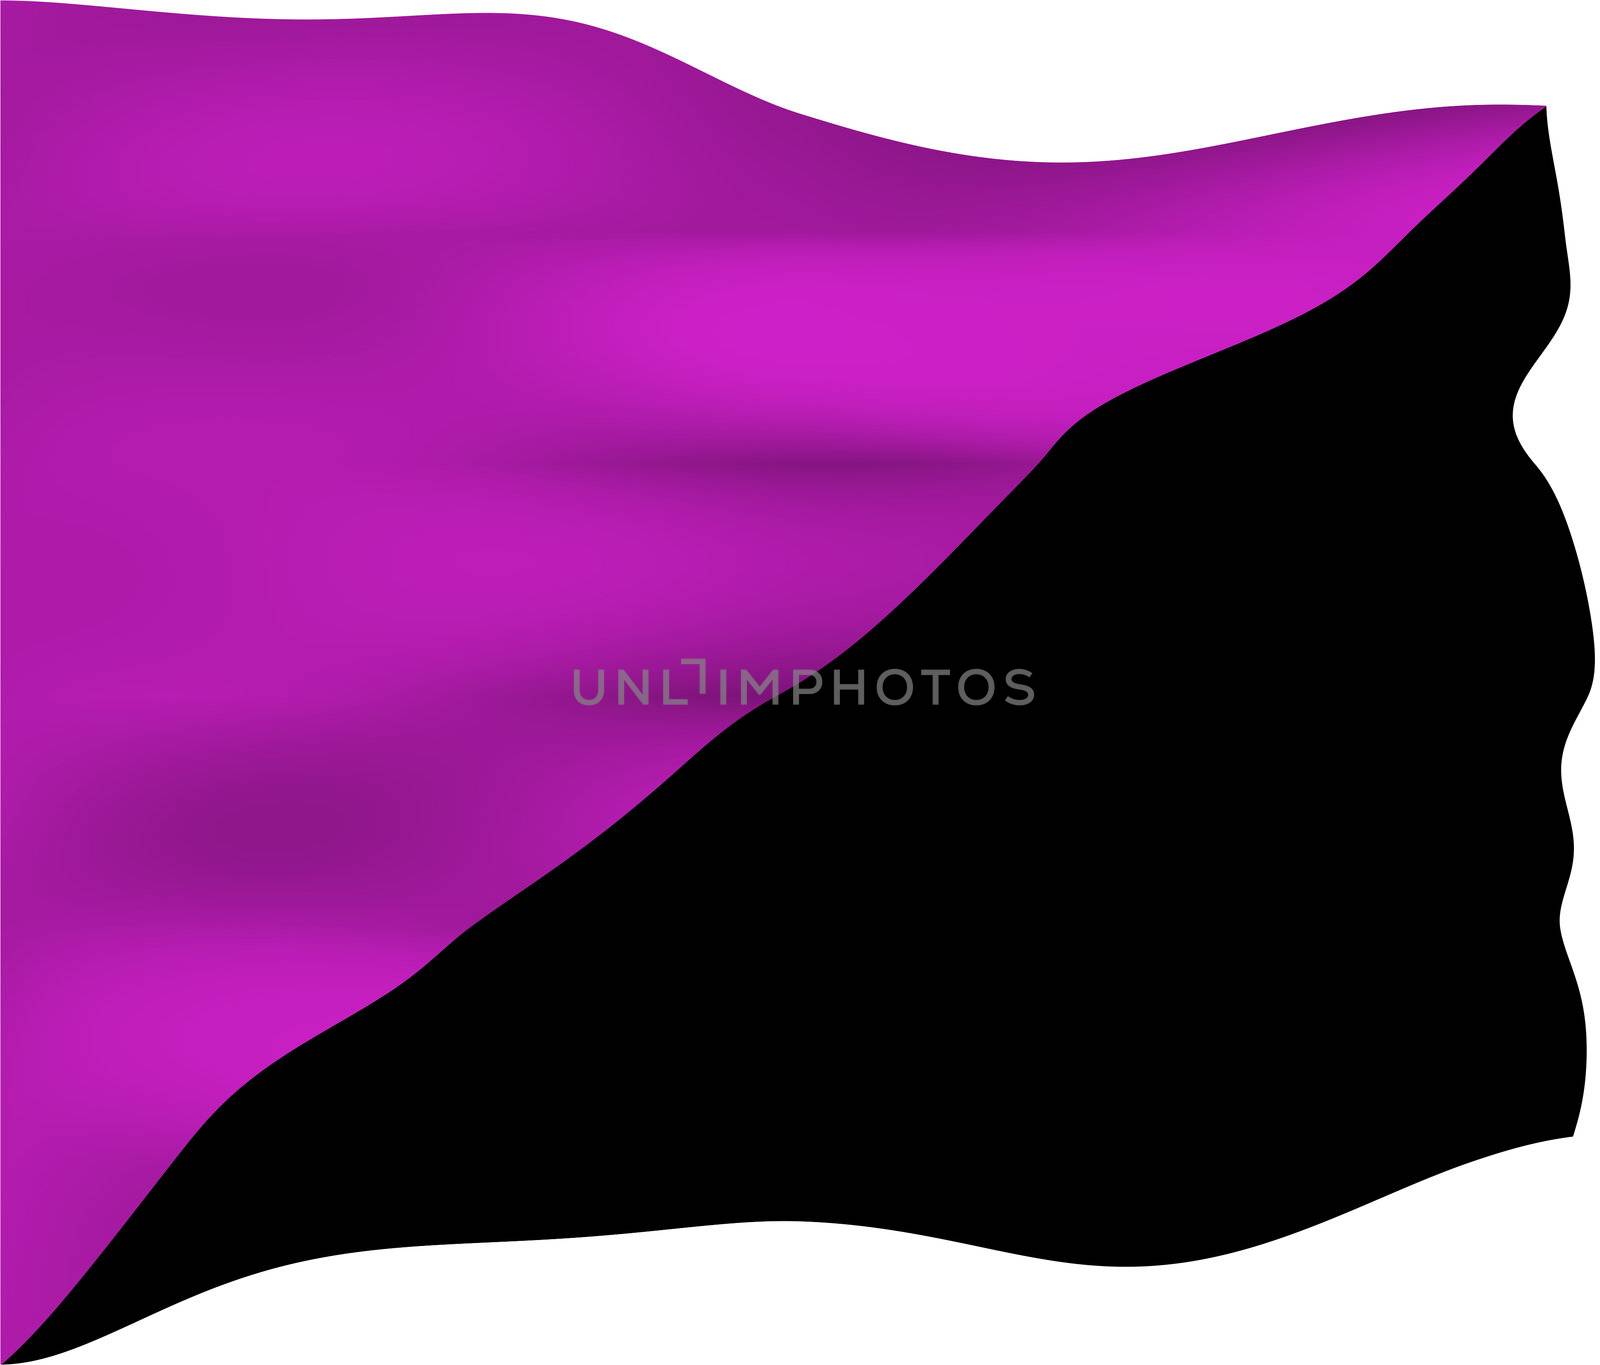 Anarchist feminism flag. Unlike other bisected anarchist flags, it does not necessarily represent another form of anarchism, but is used to focus on opposition to the hierarchical patterns of sexism and patriarchy.
